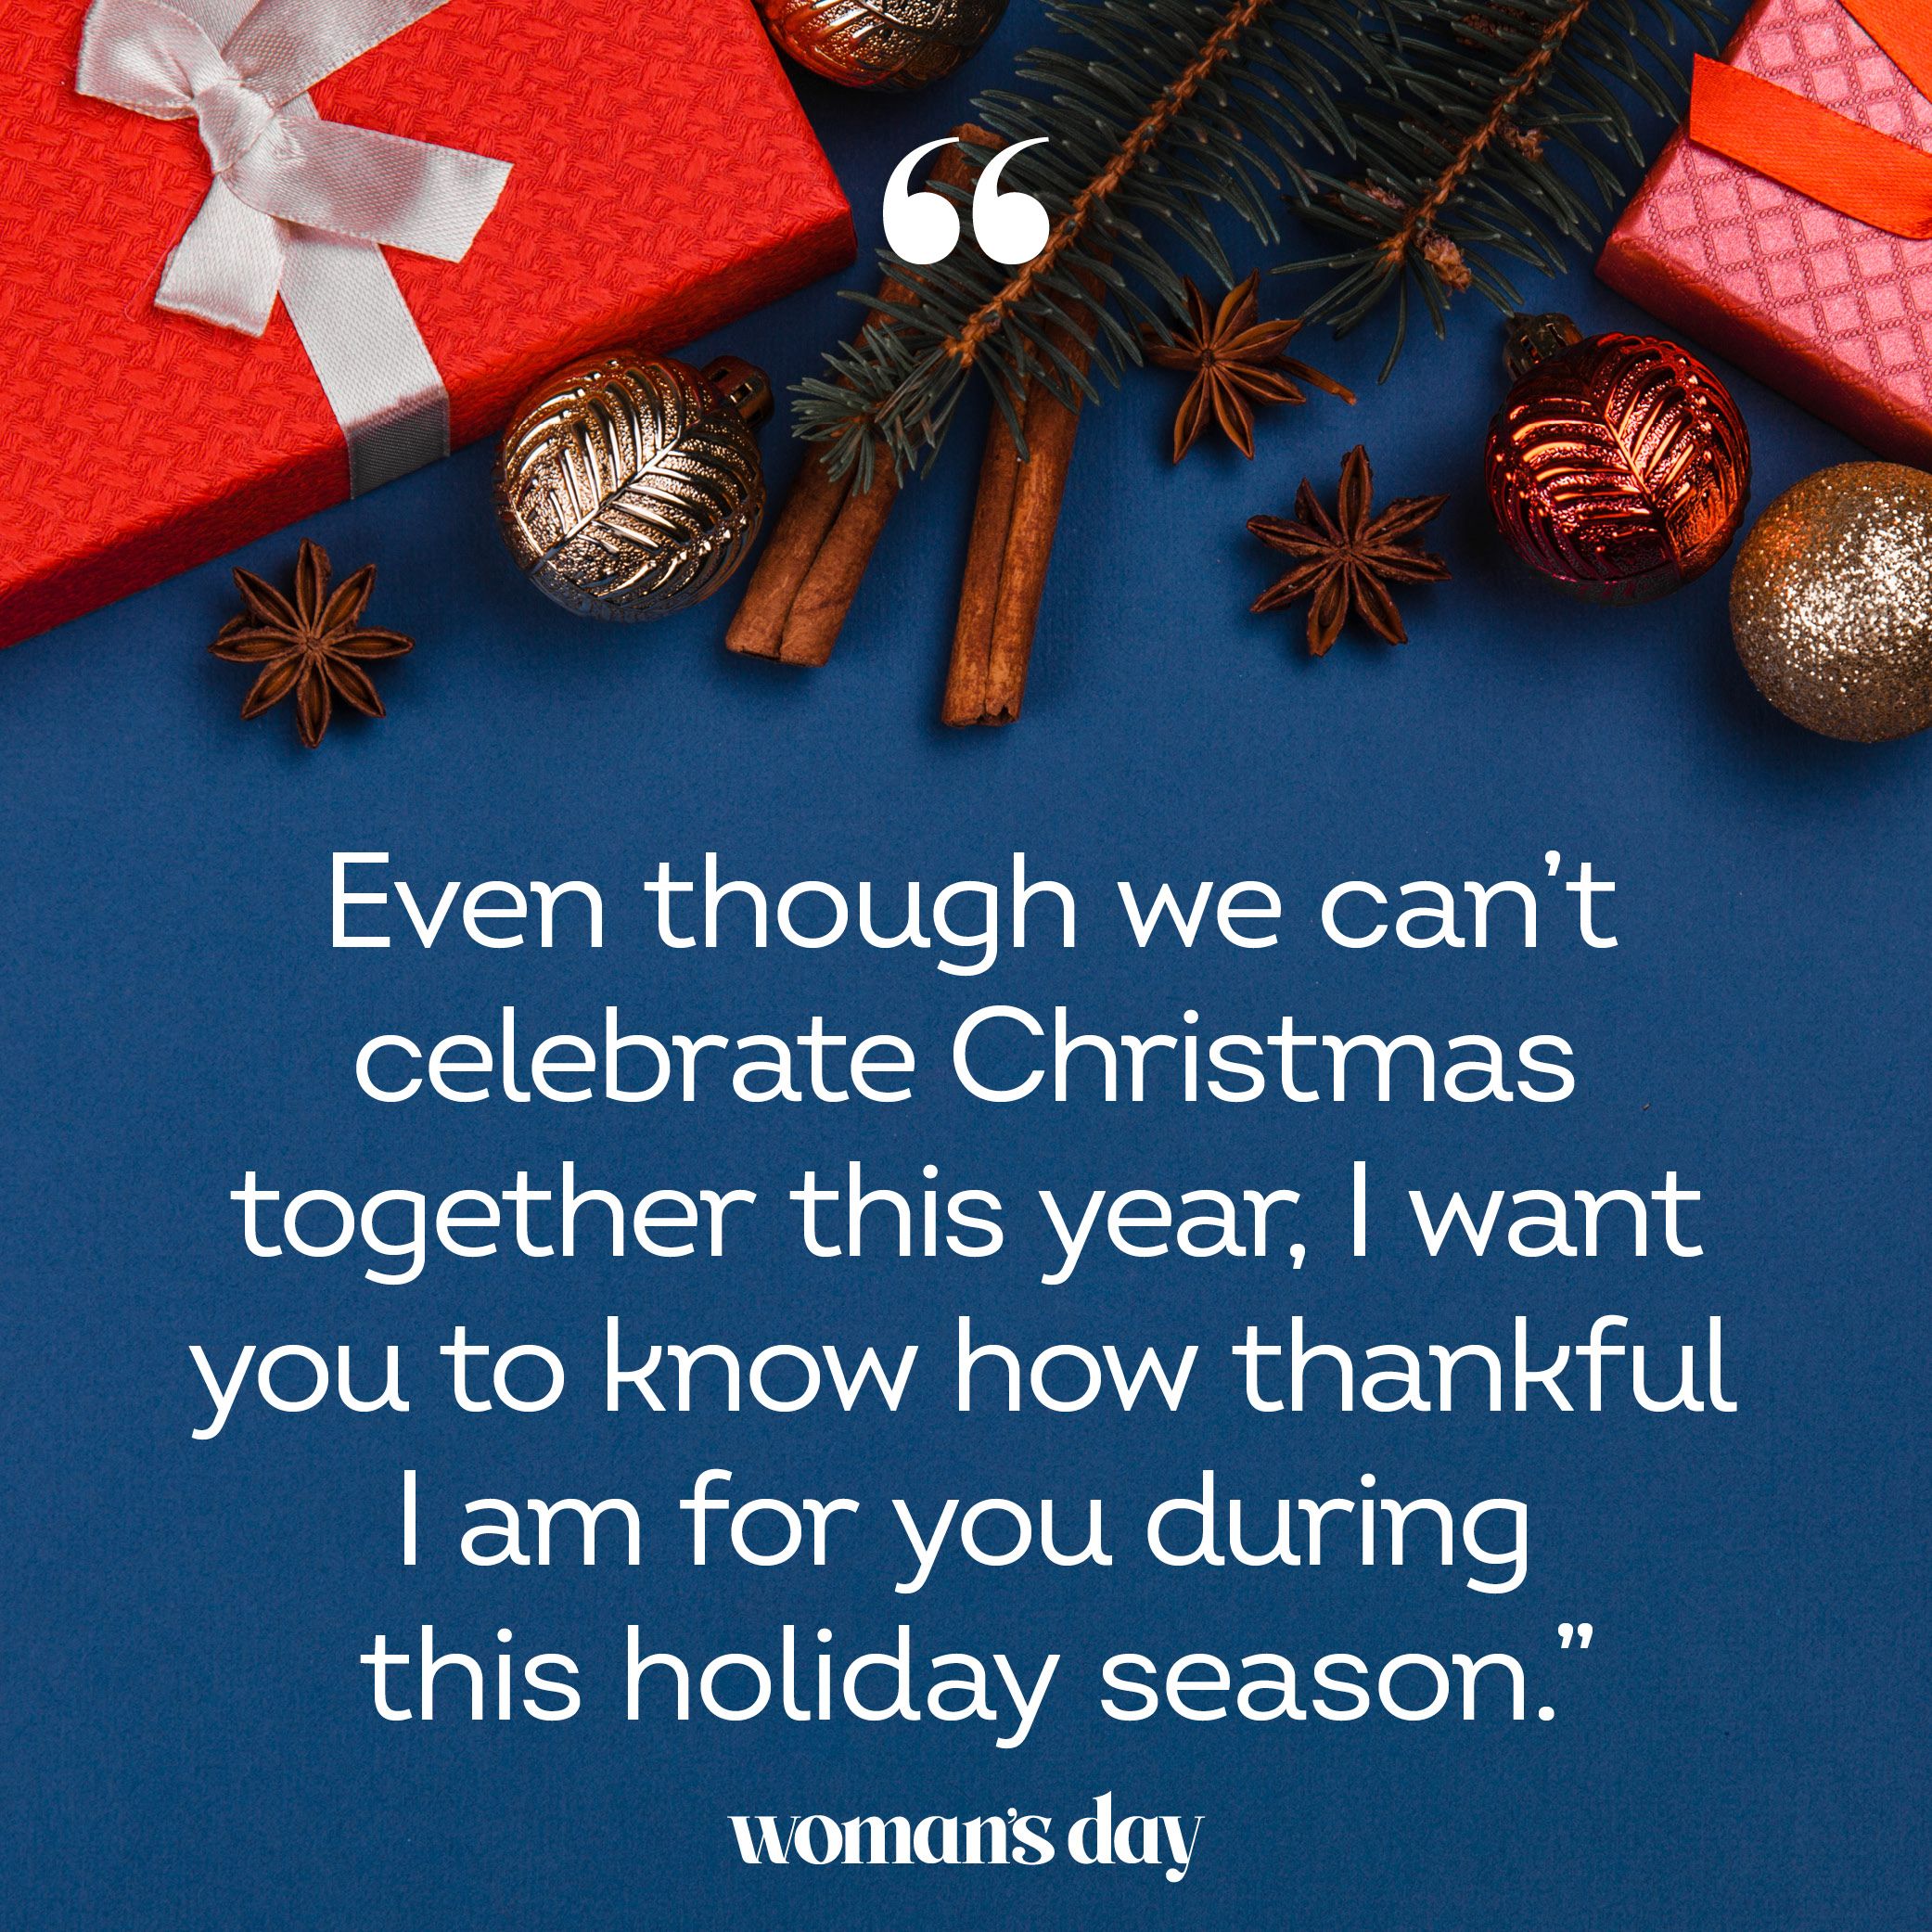 A holiday wish for all the seasons